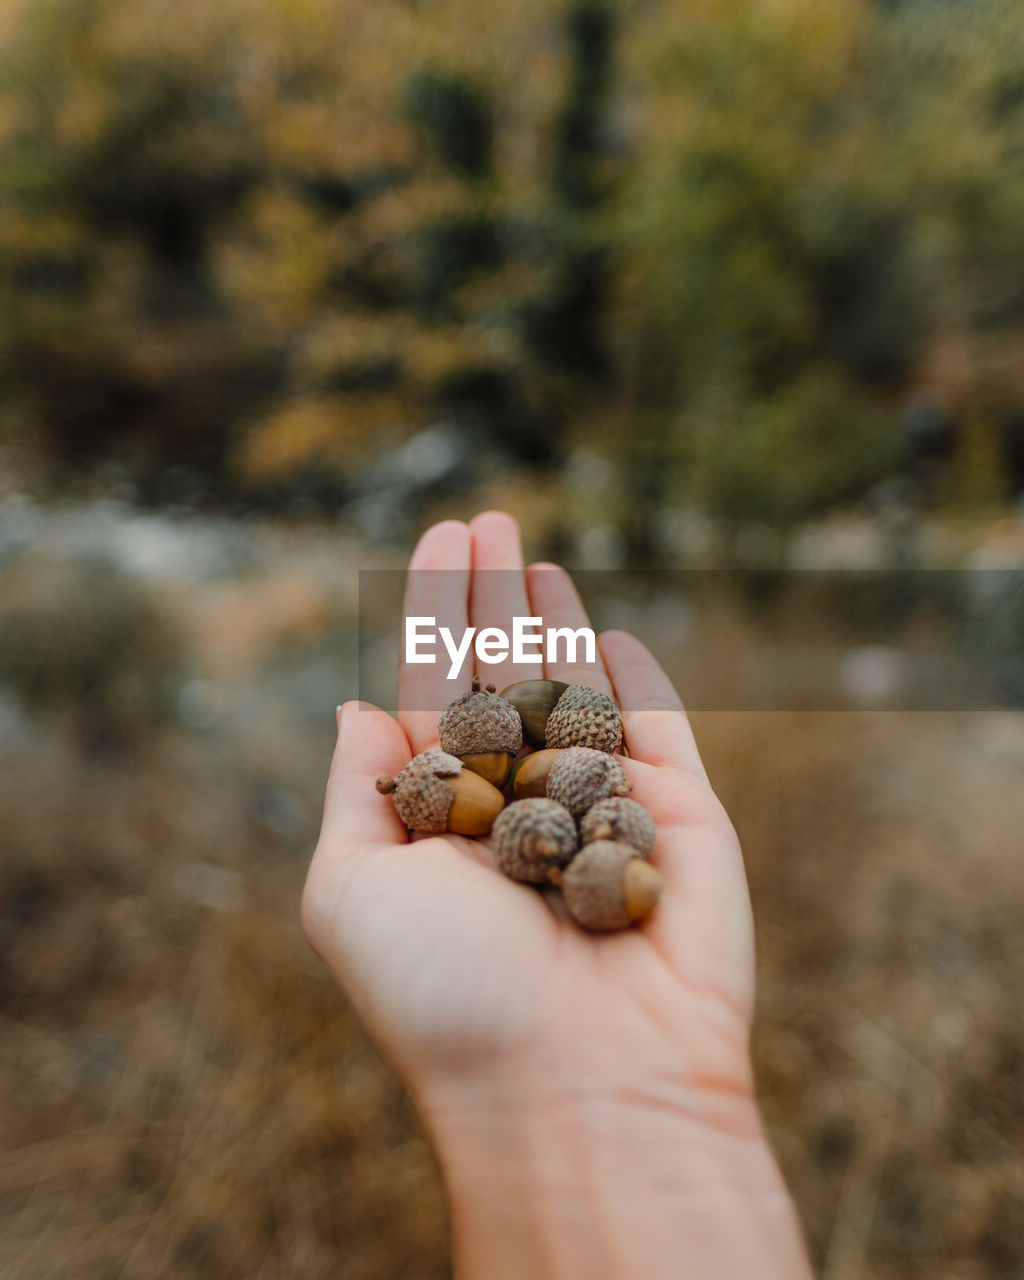 Hand holding acorns with nature in the background